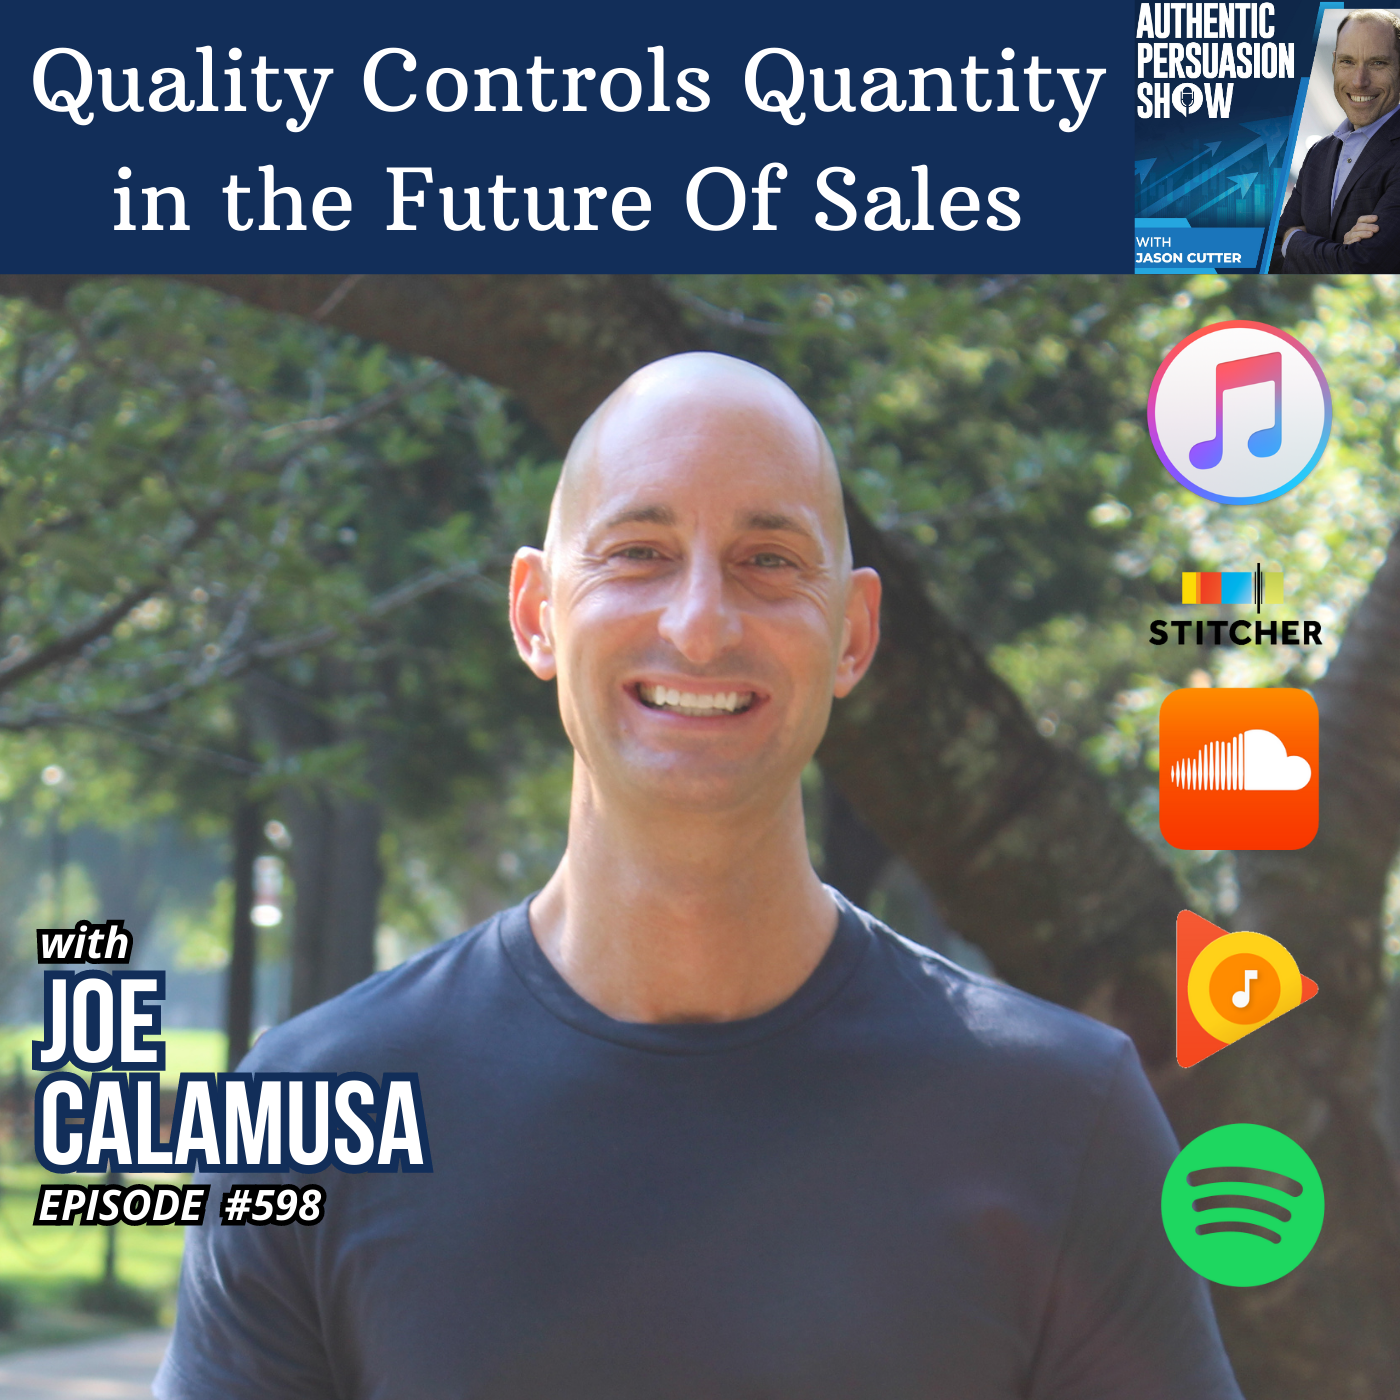 [598] Quality Controls Quantity in the Future Of Sales, with Joe Calamusa from the University of Alabama